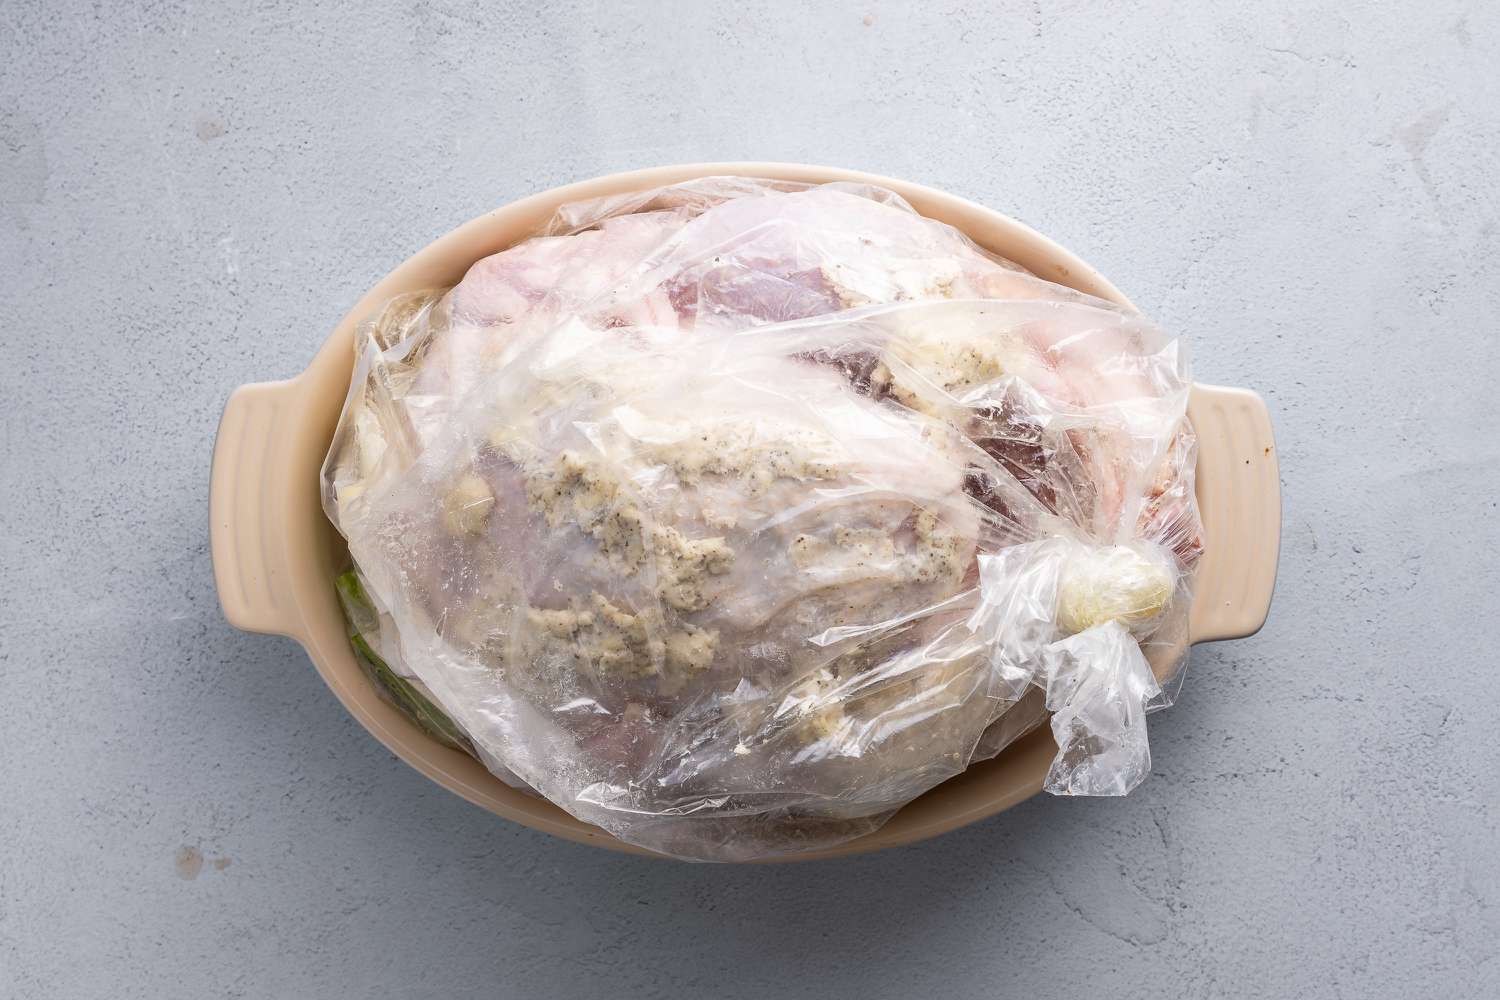 https://recipes.net/wp-content/uploads/2023/12/how-to-sous-vide-whole-turkey-1703835765.jpg